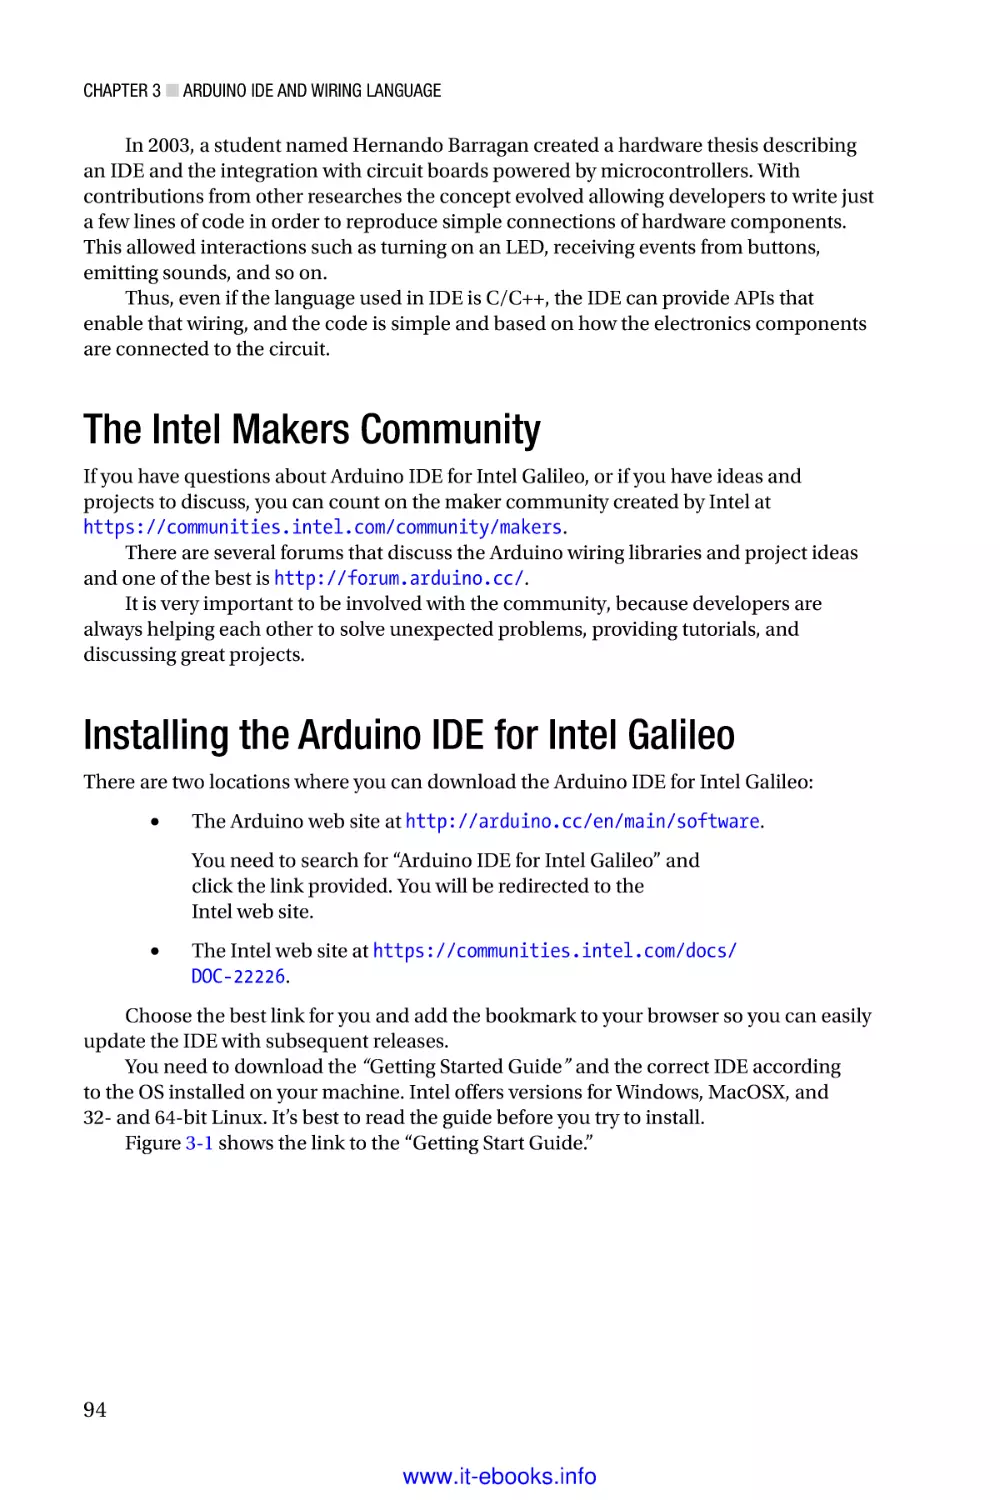 The Intel Makers Community
Installing the Arduino IDE for Intel Galileo